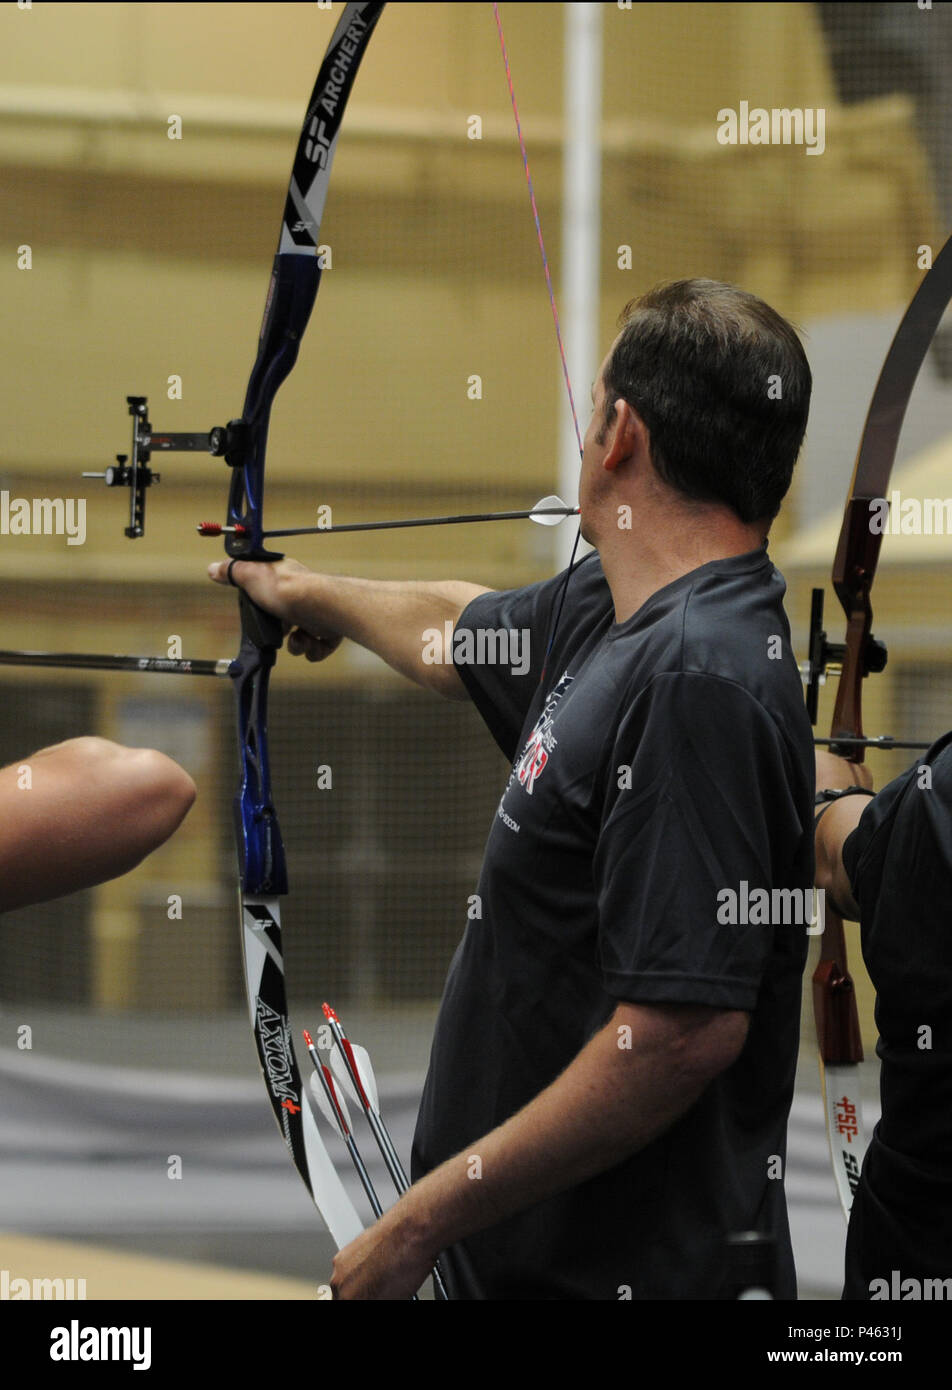 The 2016 DoD Warrior Games includes archery, both recurve bow, seen here, compound bow